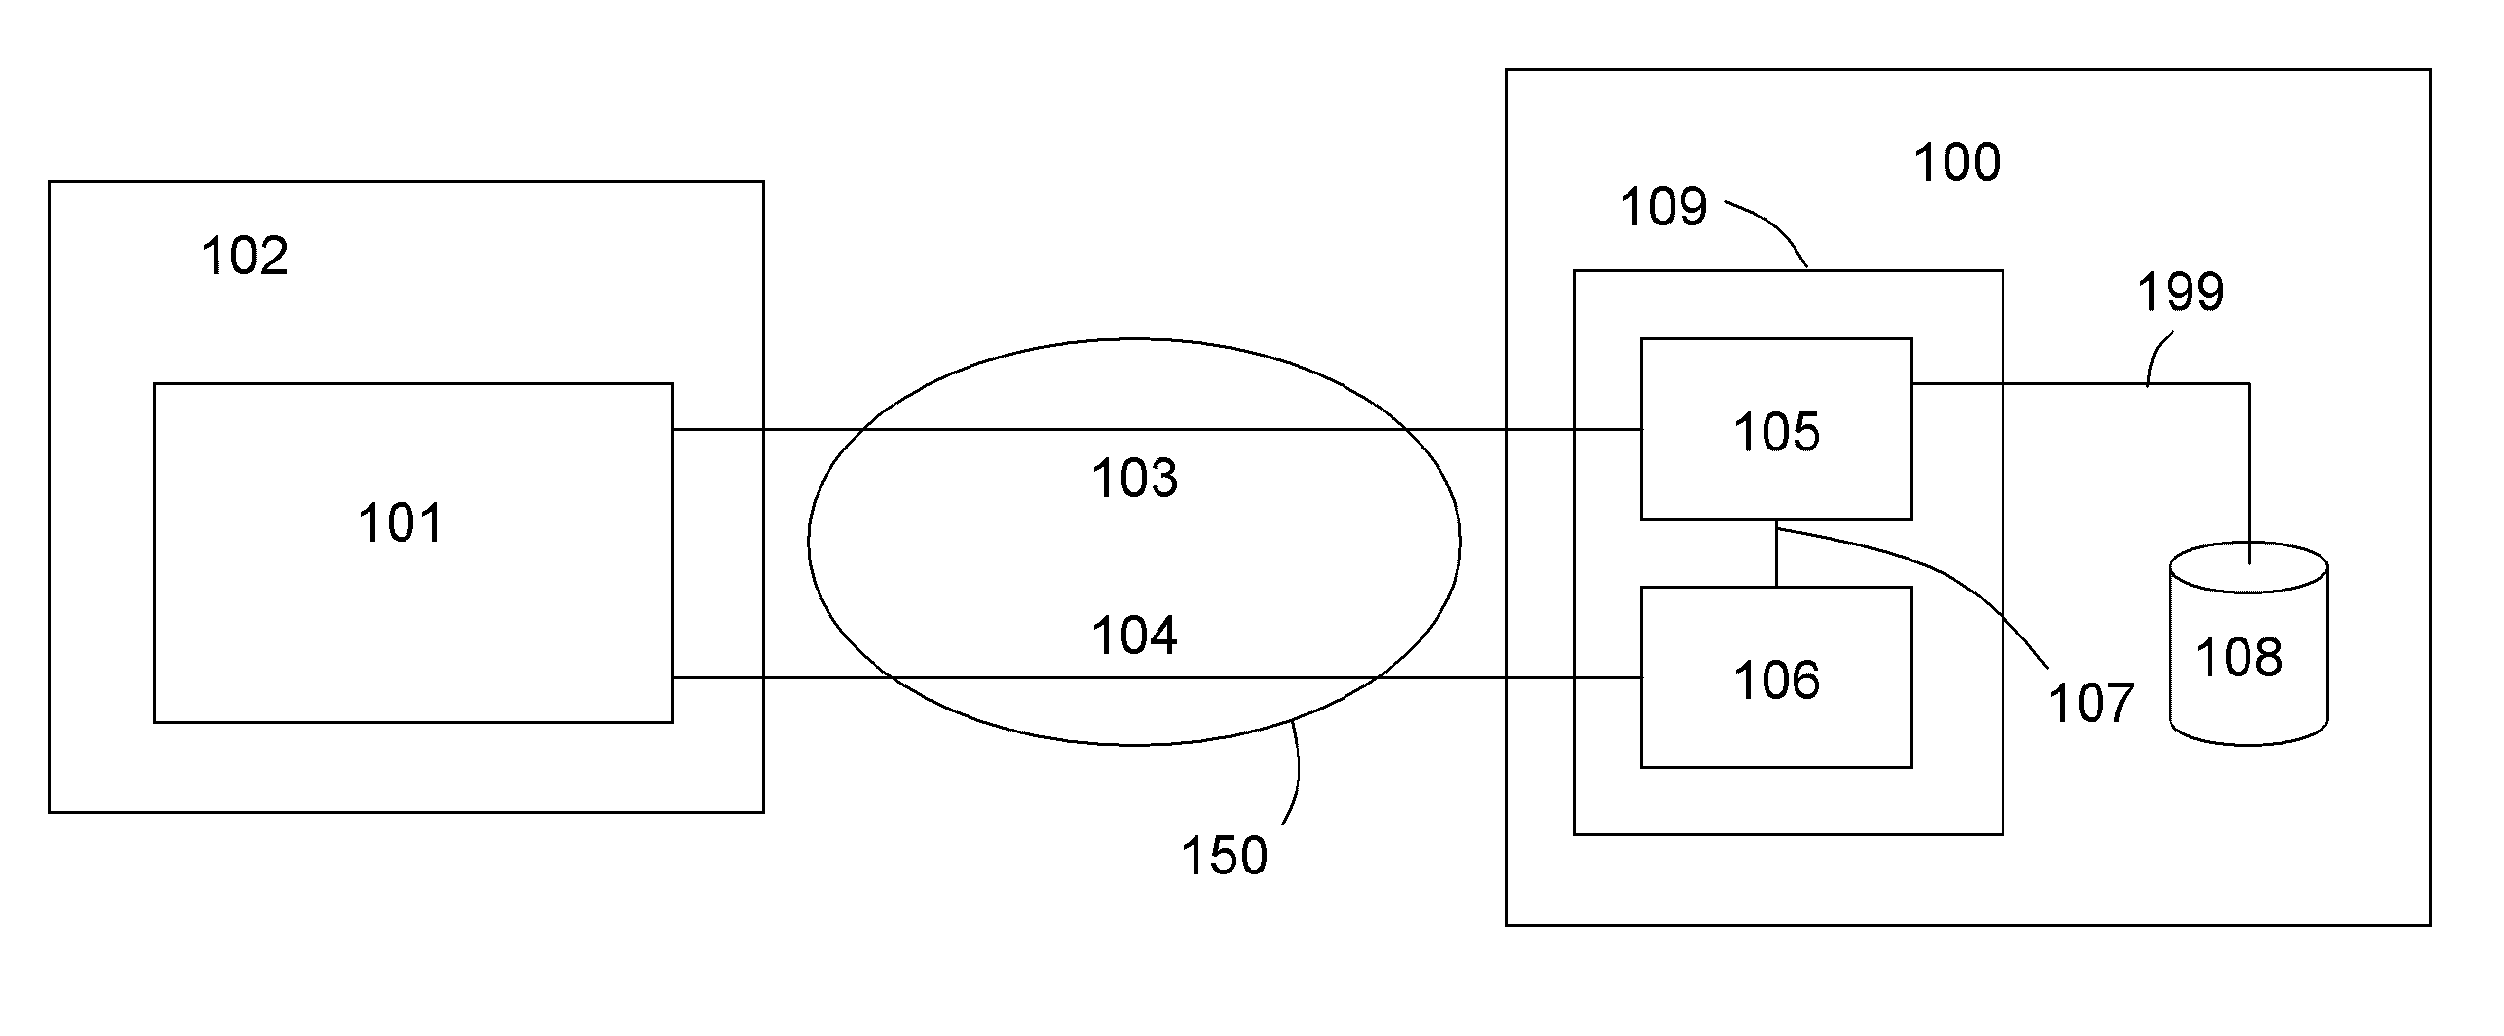 Methods for transmitting multimedia files and advertisements